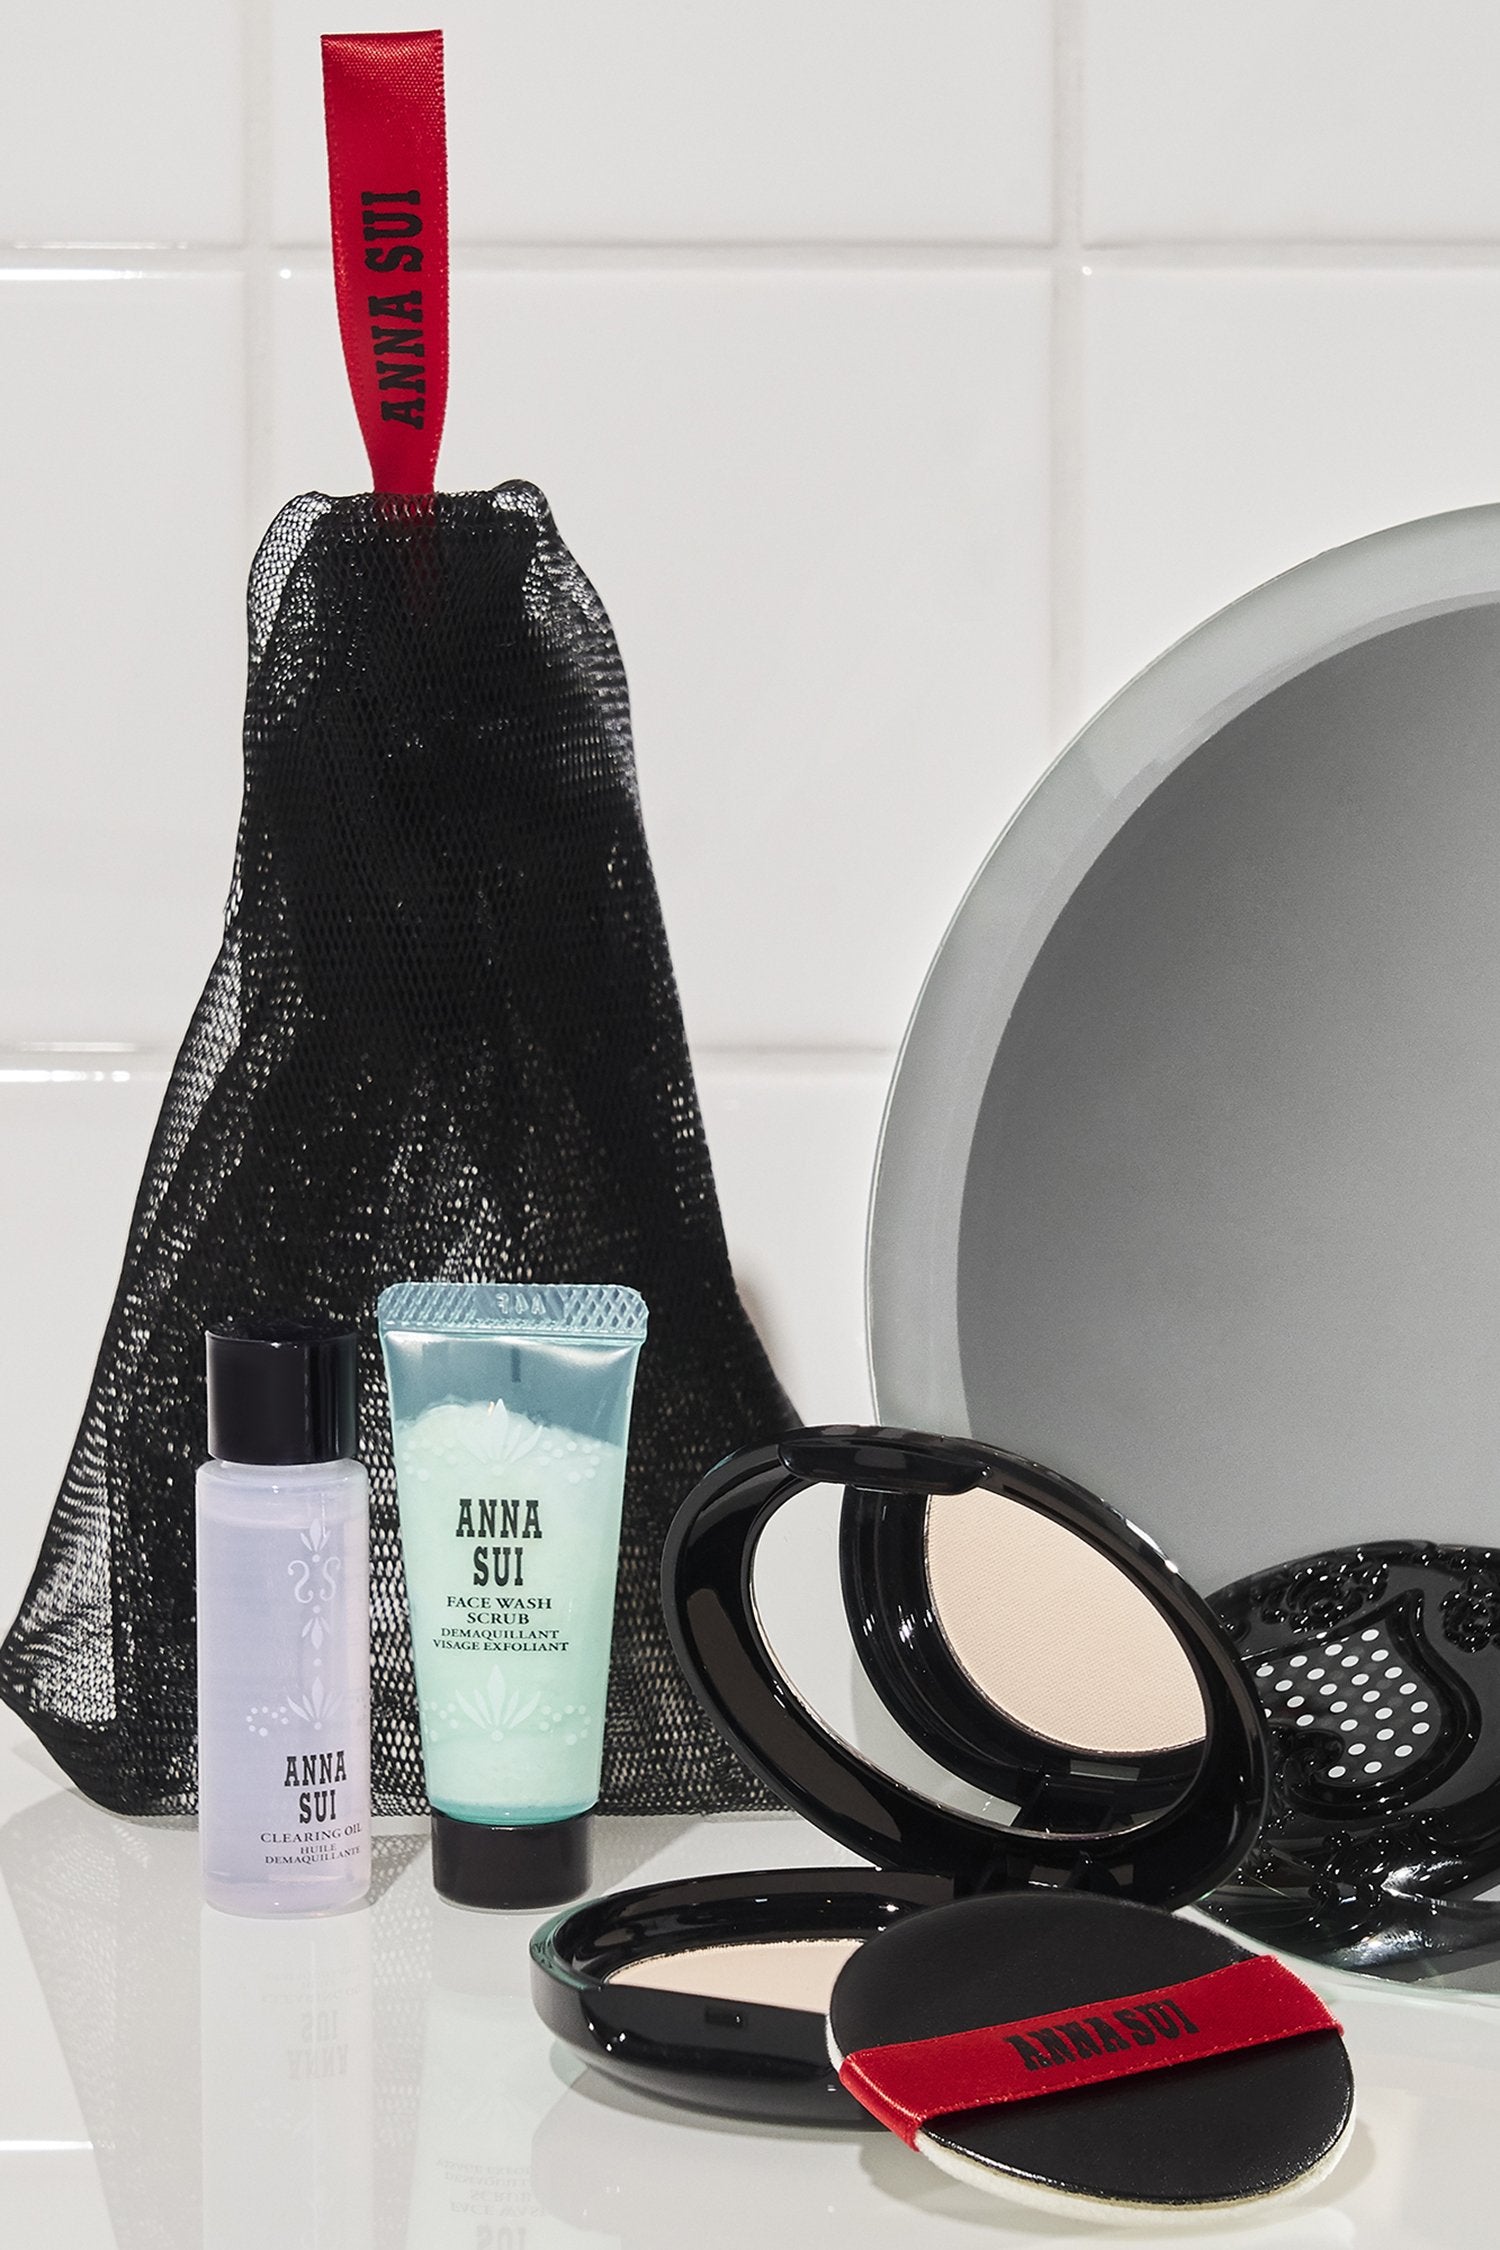 Face Wash Scrub, Clearing Lotion, Powder Container, and a Net-Like Bag on a Bathroom Countertop